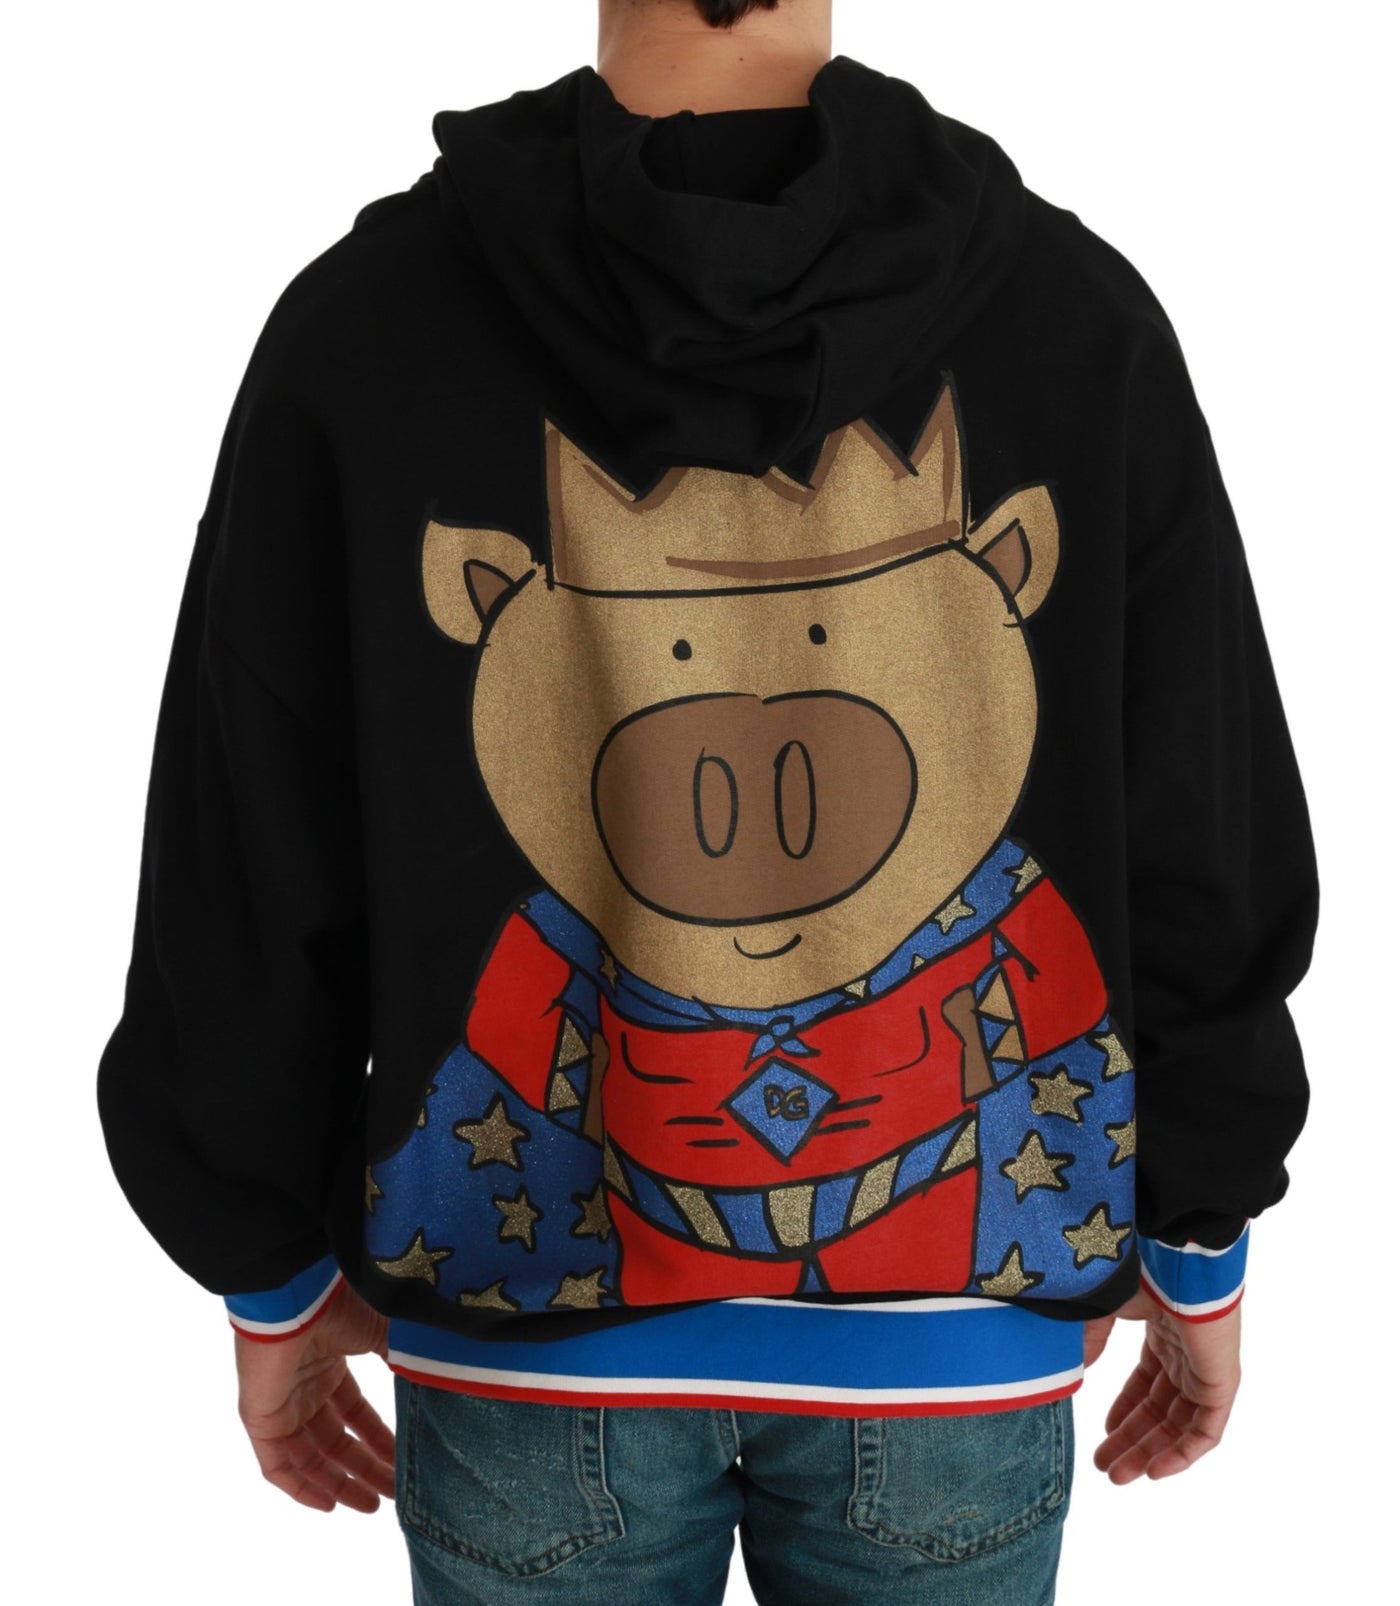 Dolce & Gabbana Black Sweater Pig of the Year Hooded